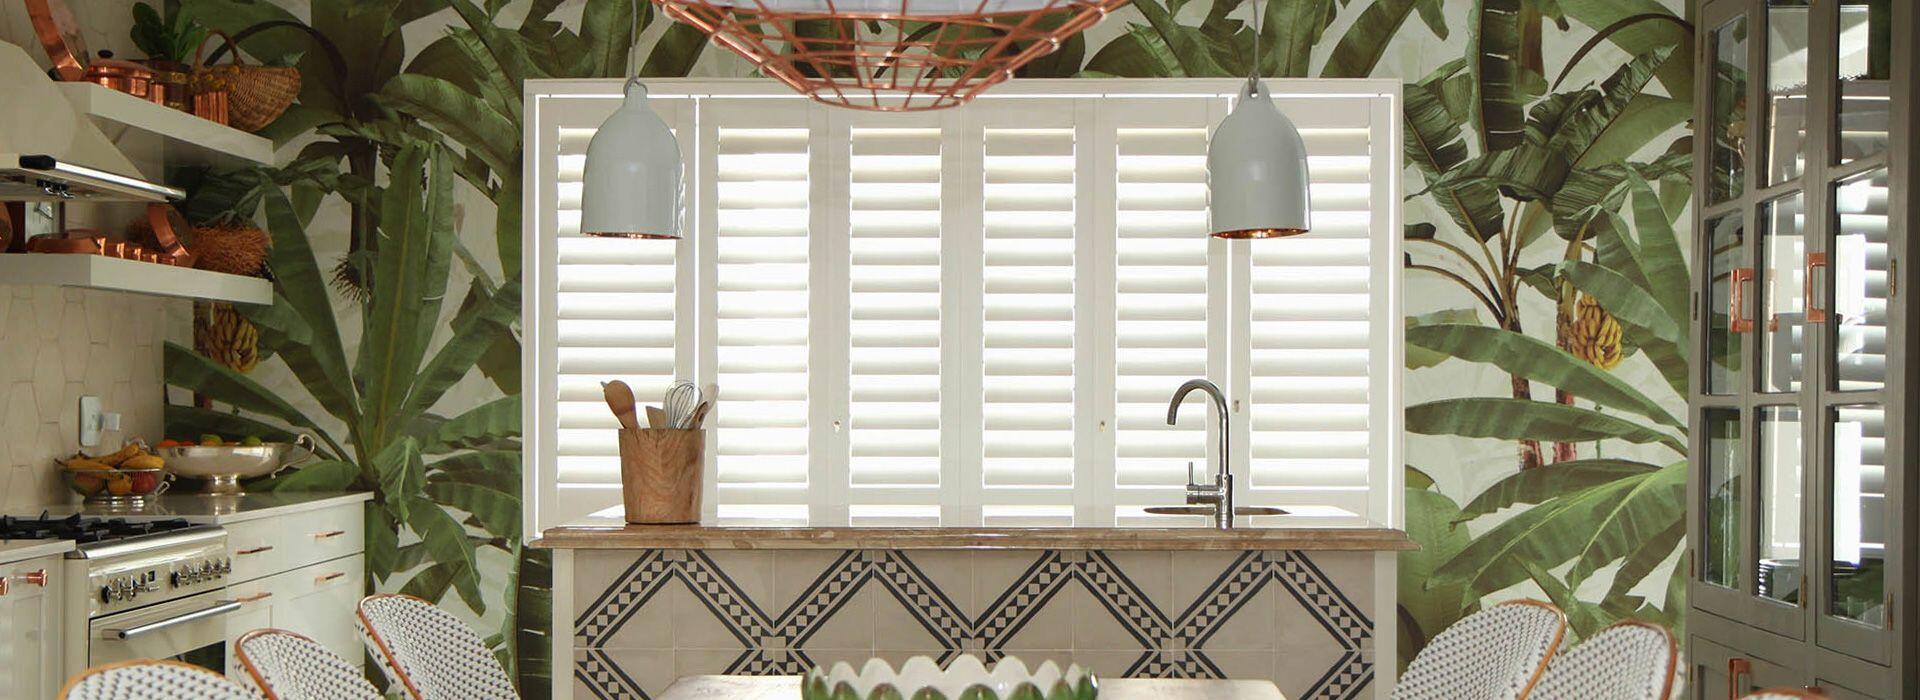 Security Shutters for Kitchen Windows by The Aluminium Shutter Company